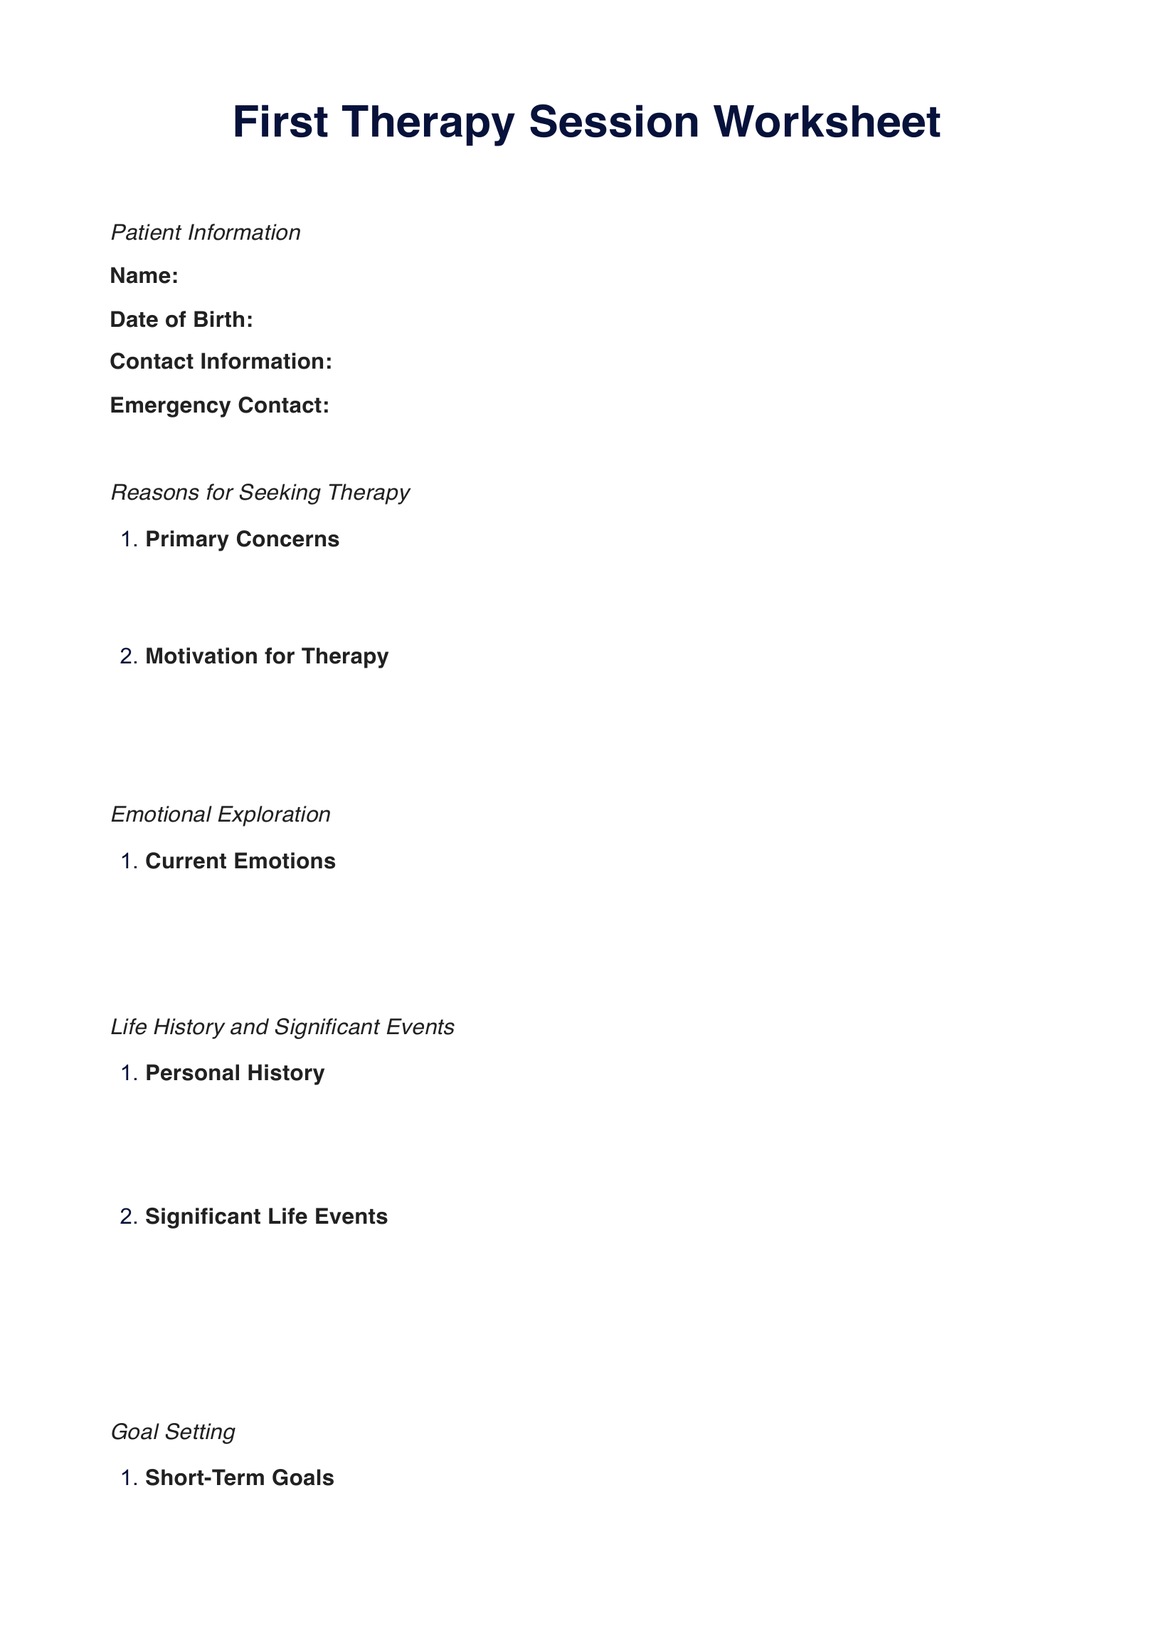 First Therapy Session Worksheet PDF Example